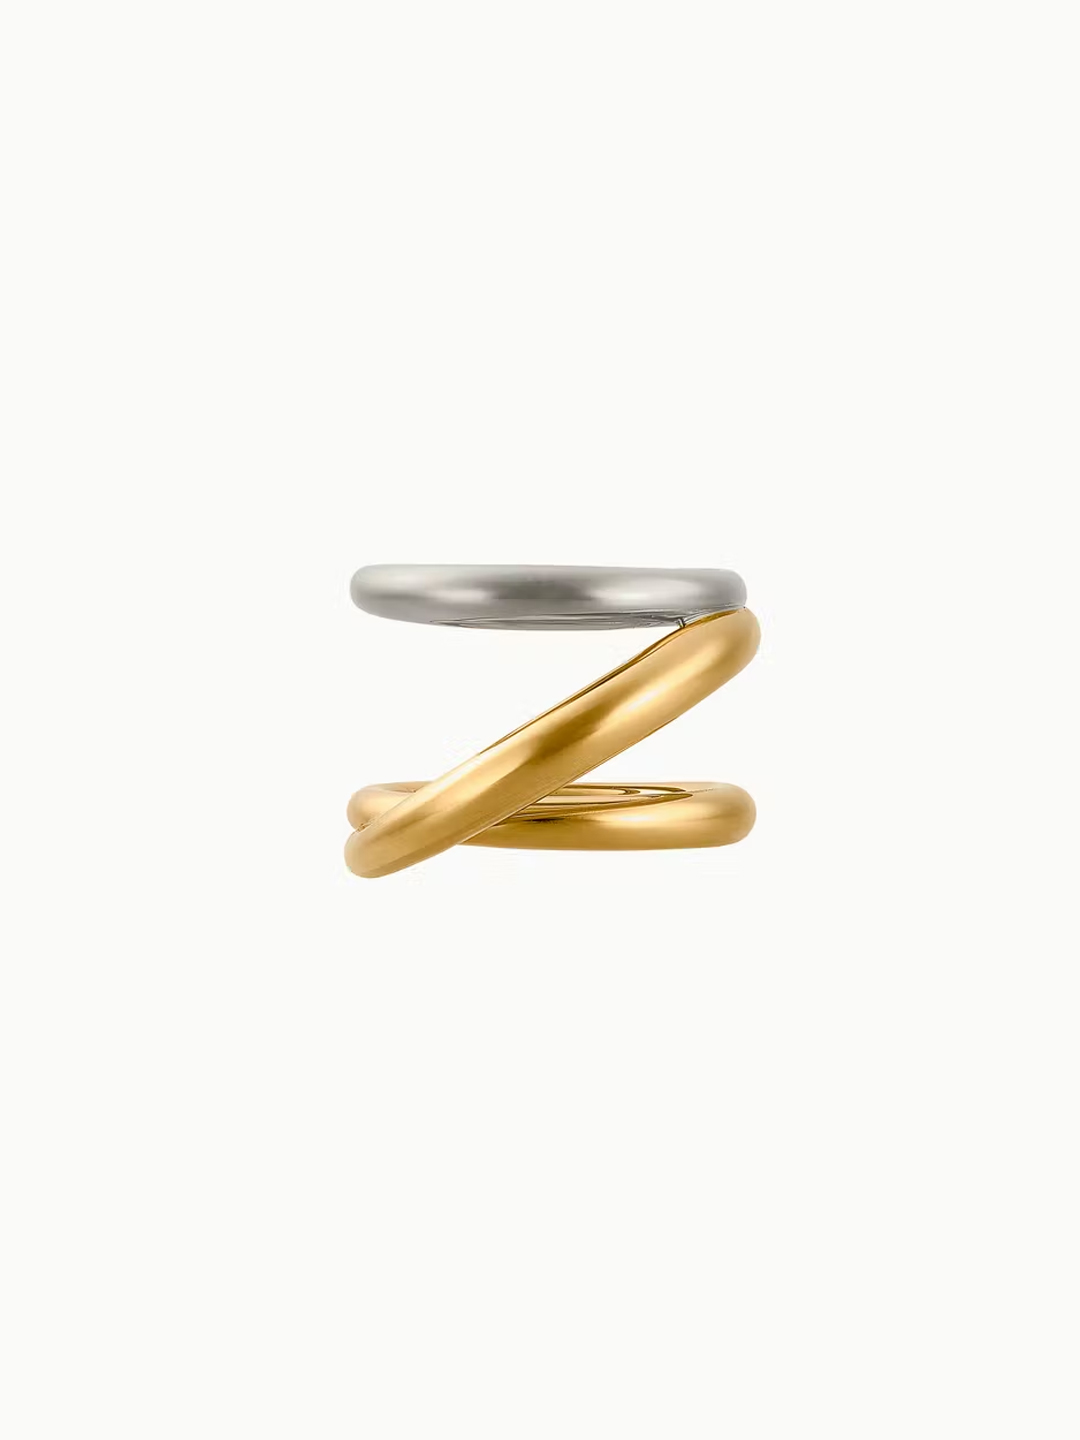 Triplet Ring - Silver/Yellow Gold